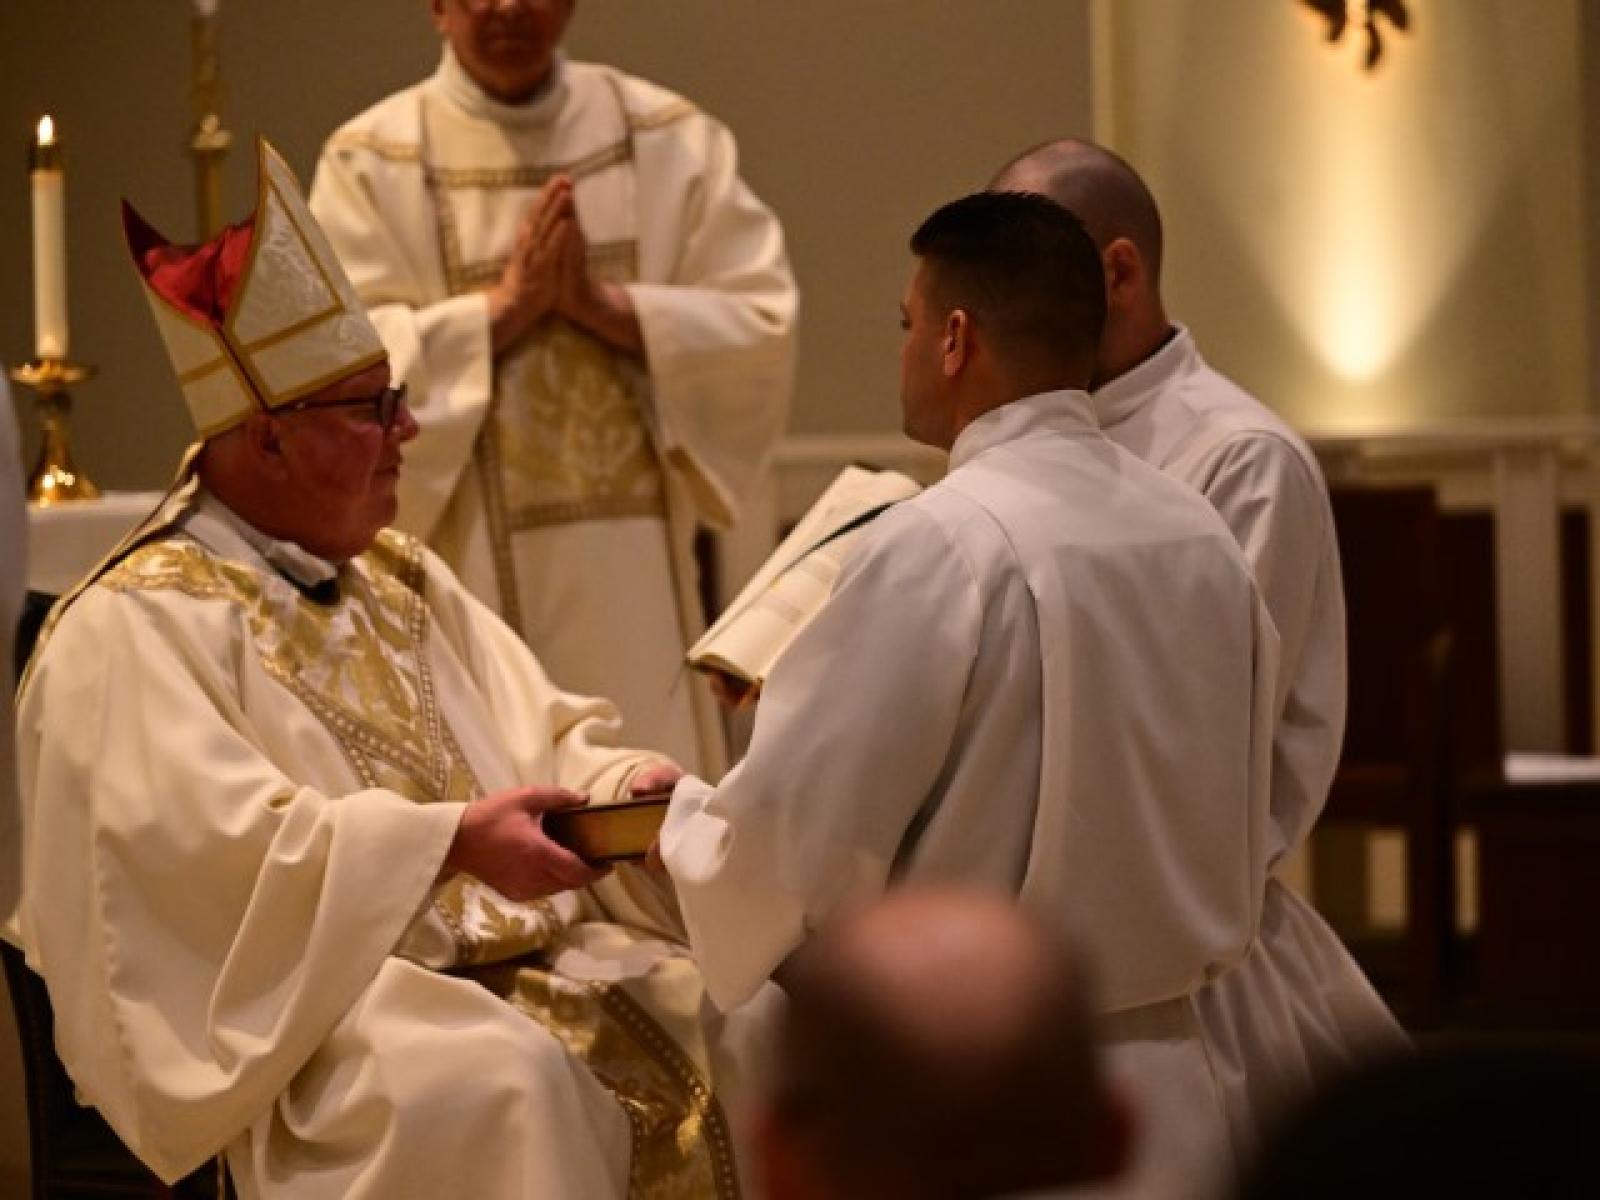 Bishop William D. Byrne with Paul Daniel McDonald _25, Diocese of Albany